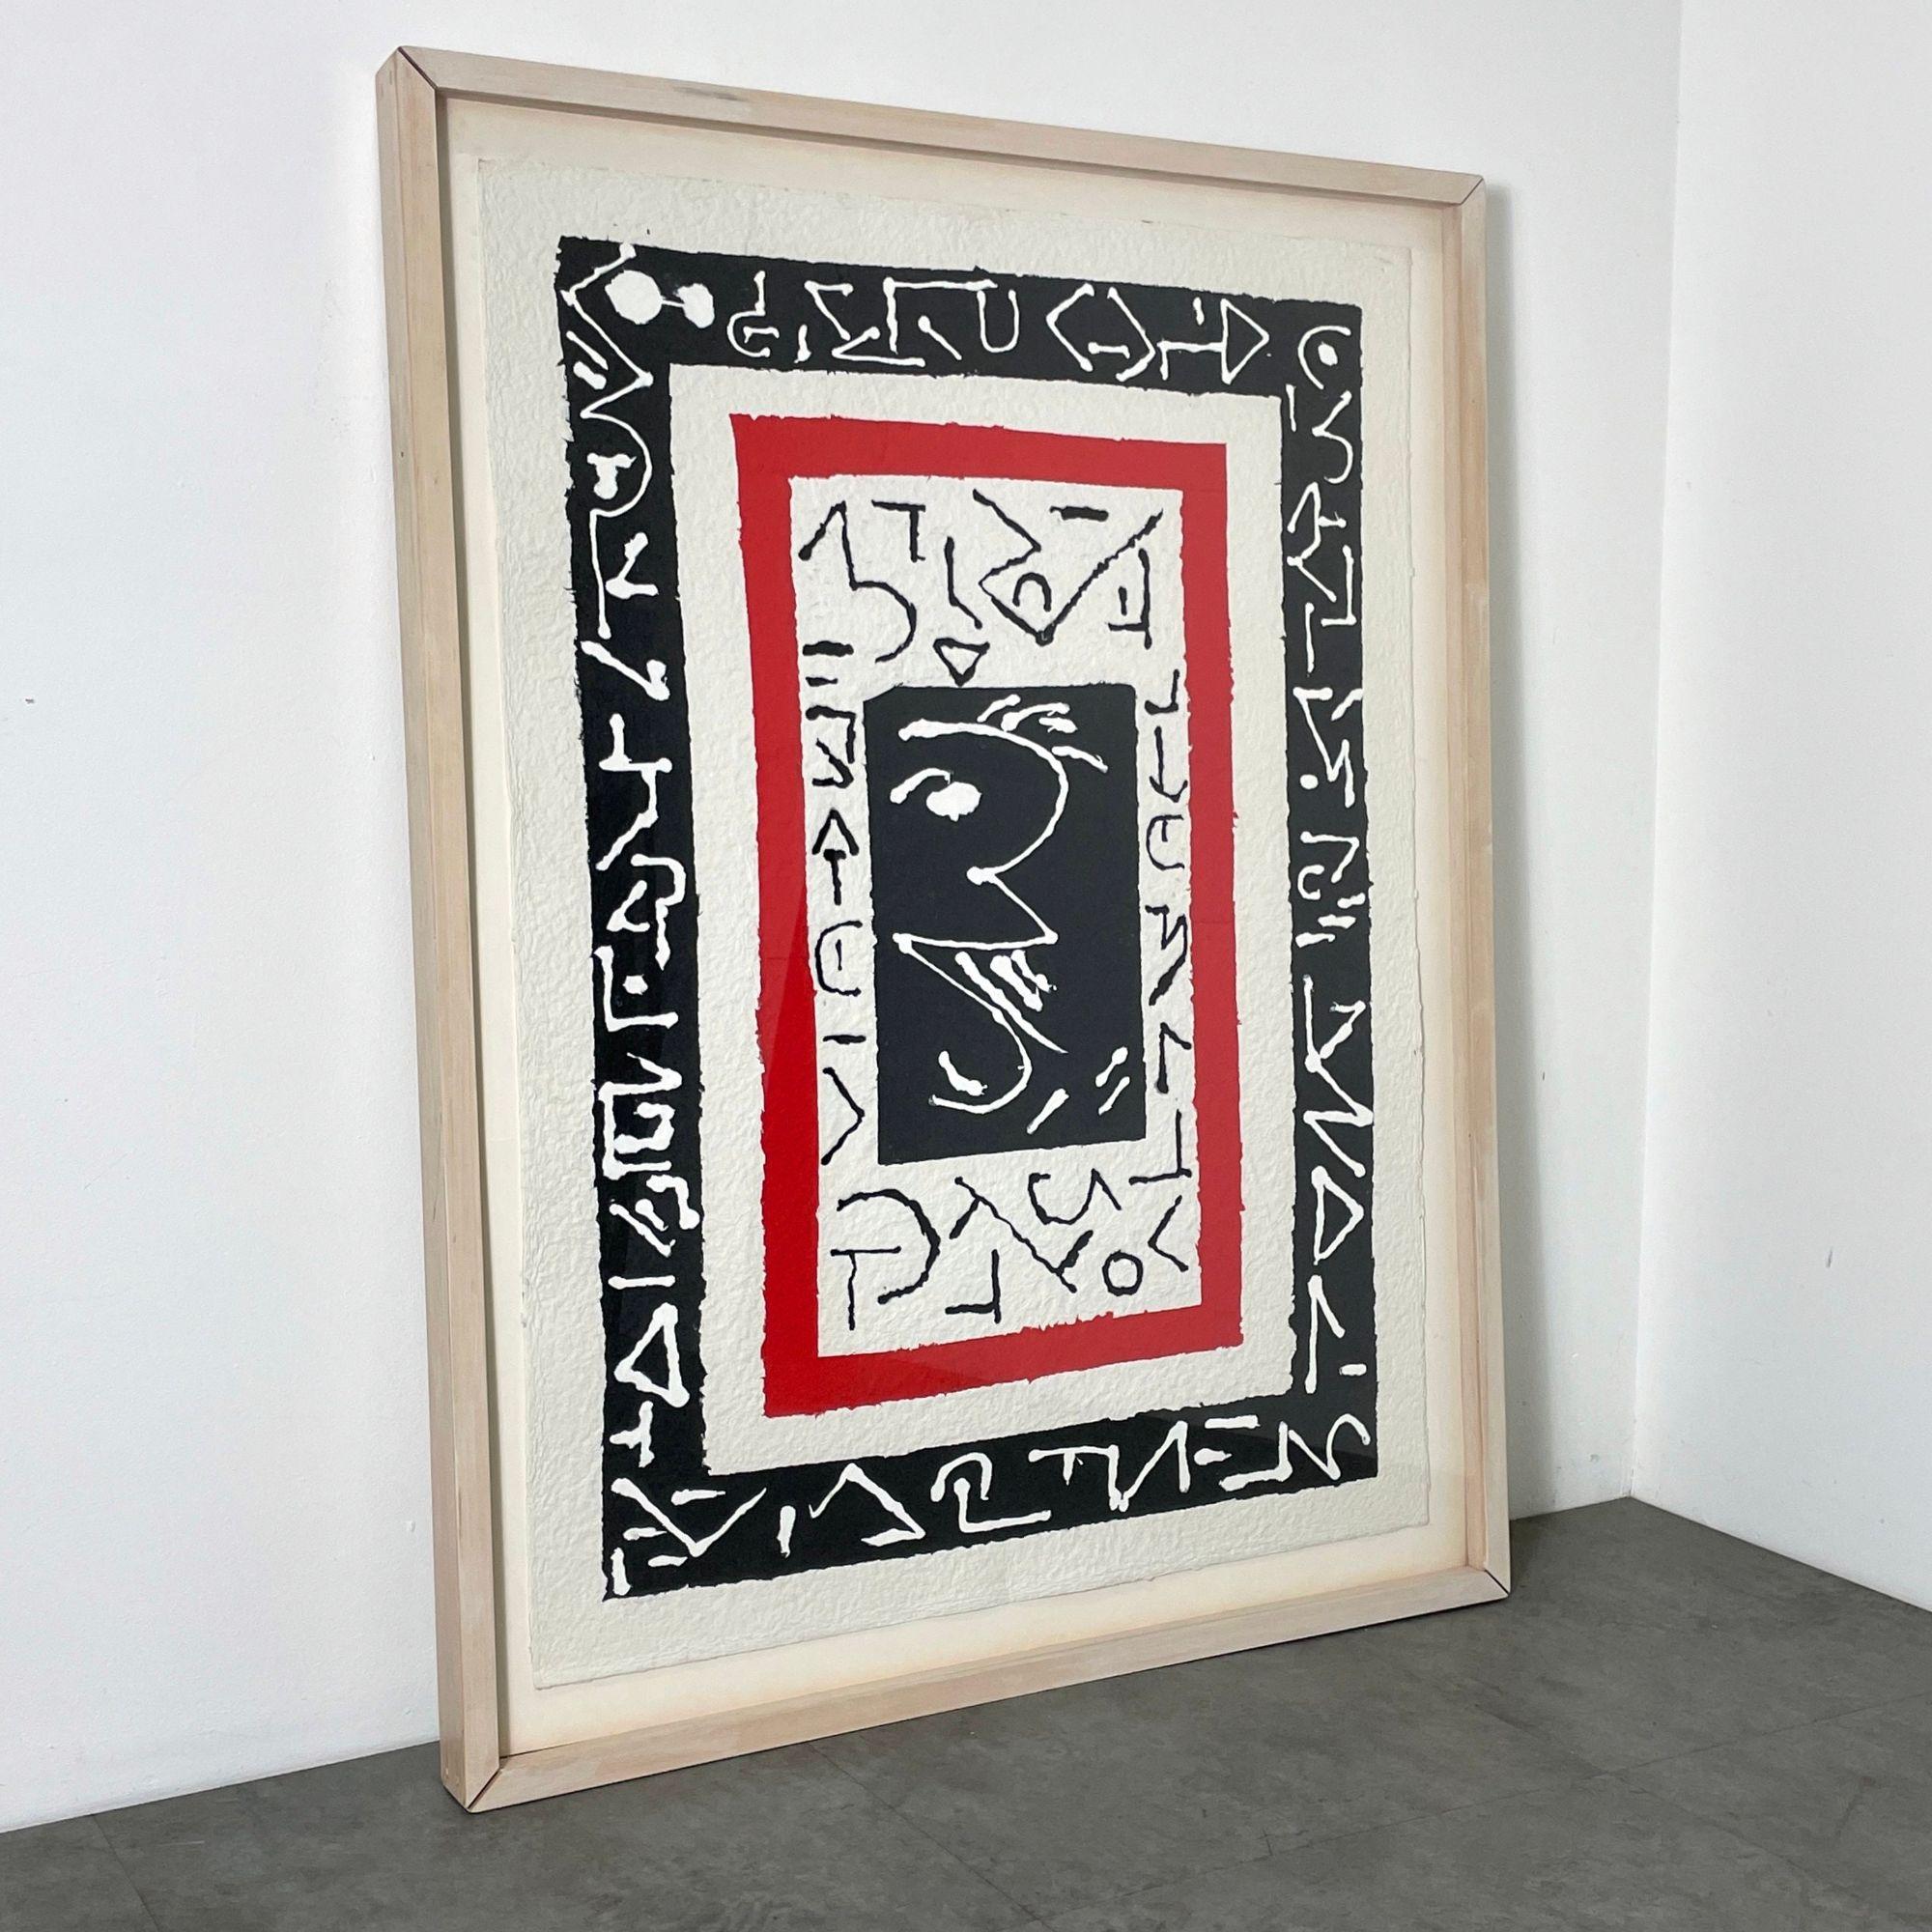 40x54 Large Vintage Abstract Painting on Hand Cast Paper by Mary Fisher 1990

Massive abstract textile art by Mary Fisher 1990
Abstract red and black hieroglyphic style design painted on hand cast paper
Hand signed and titled Telegram 2
Original